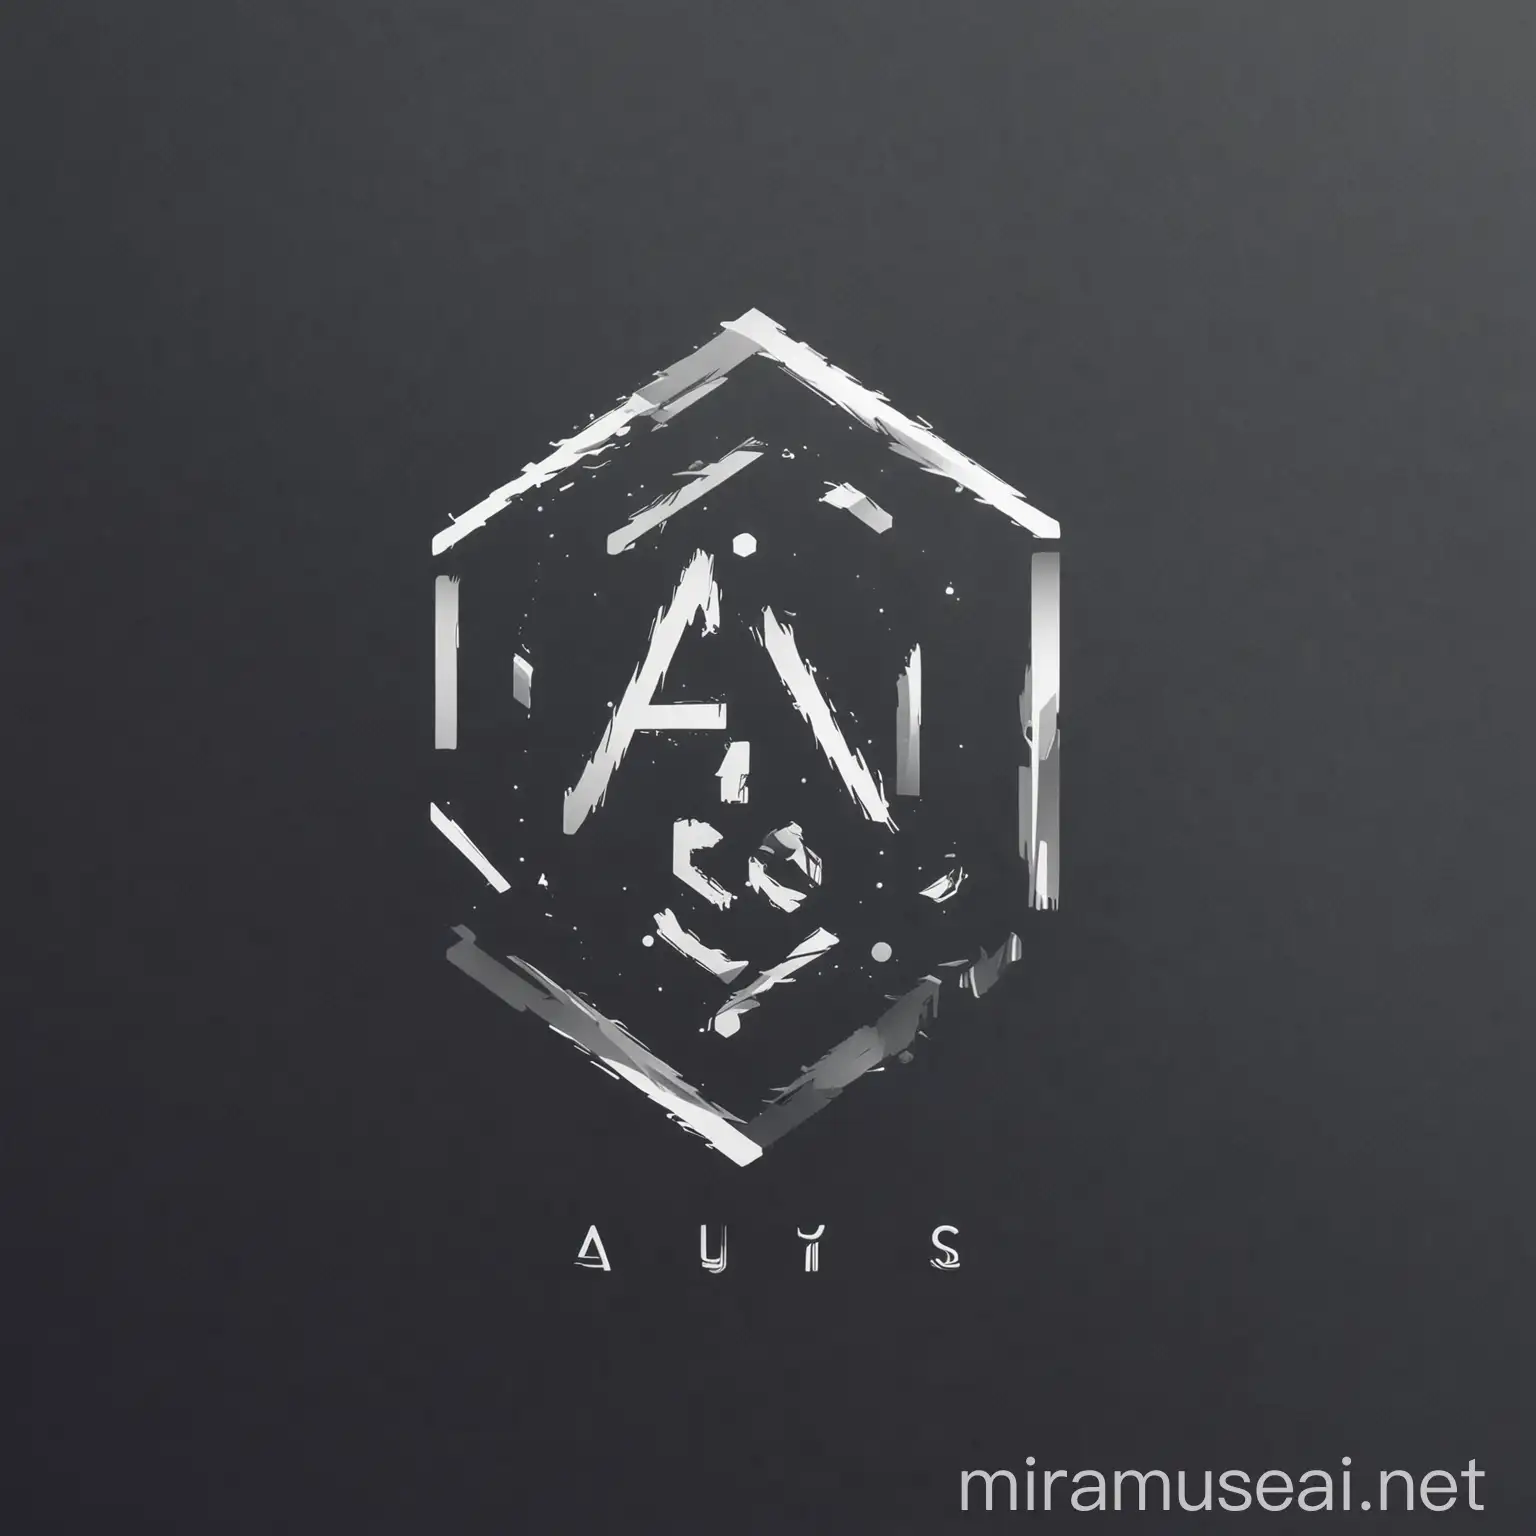 Design a sleek, minimalist logo for AI Guys incorporating mind-bending geometric elements.
Use a monospace font for the title "AI Guys" within the logo.